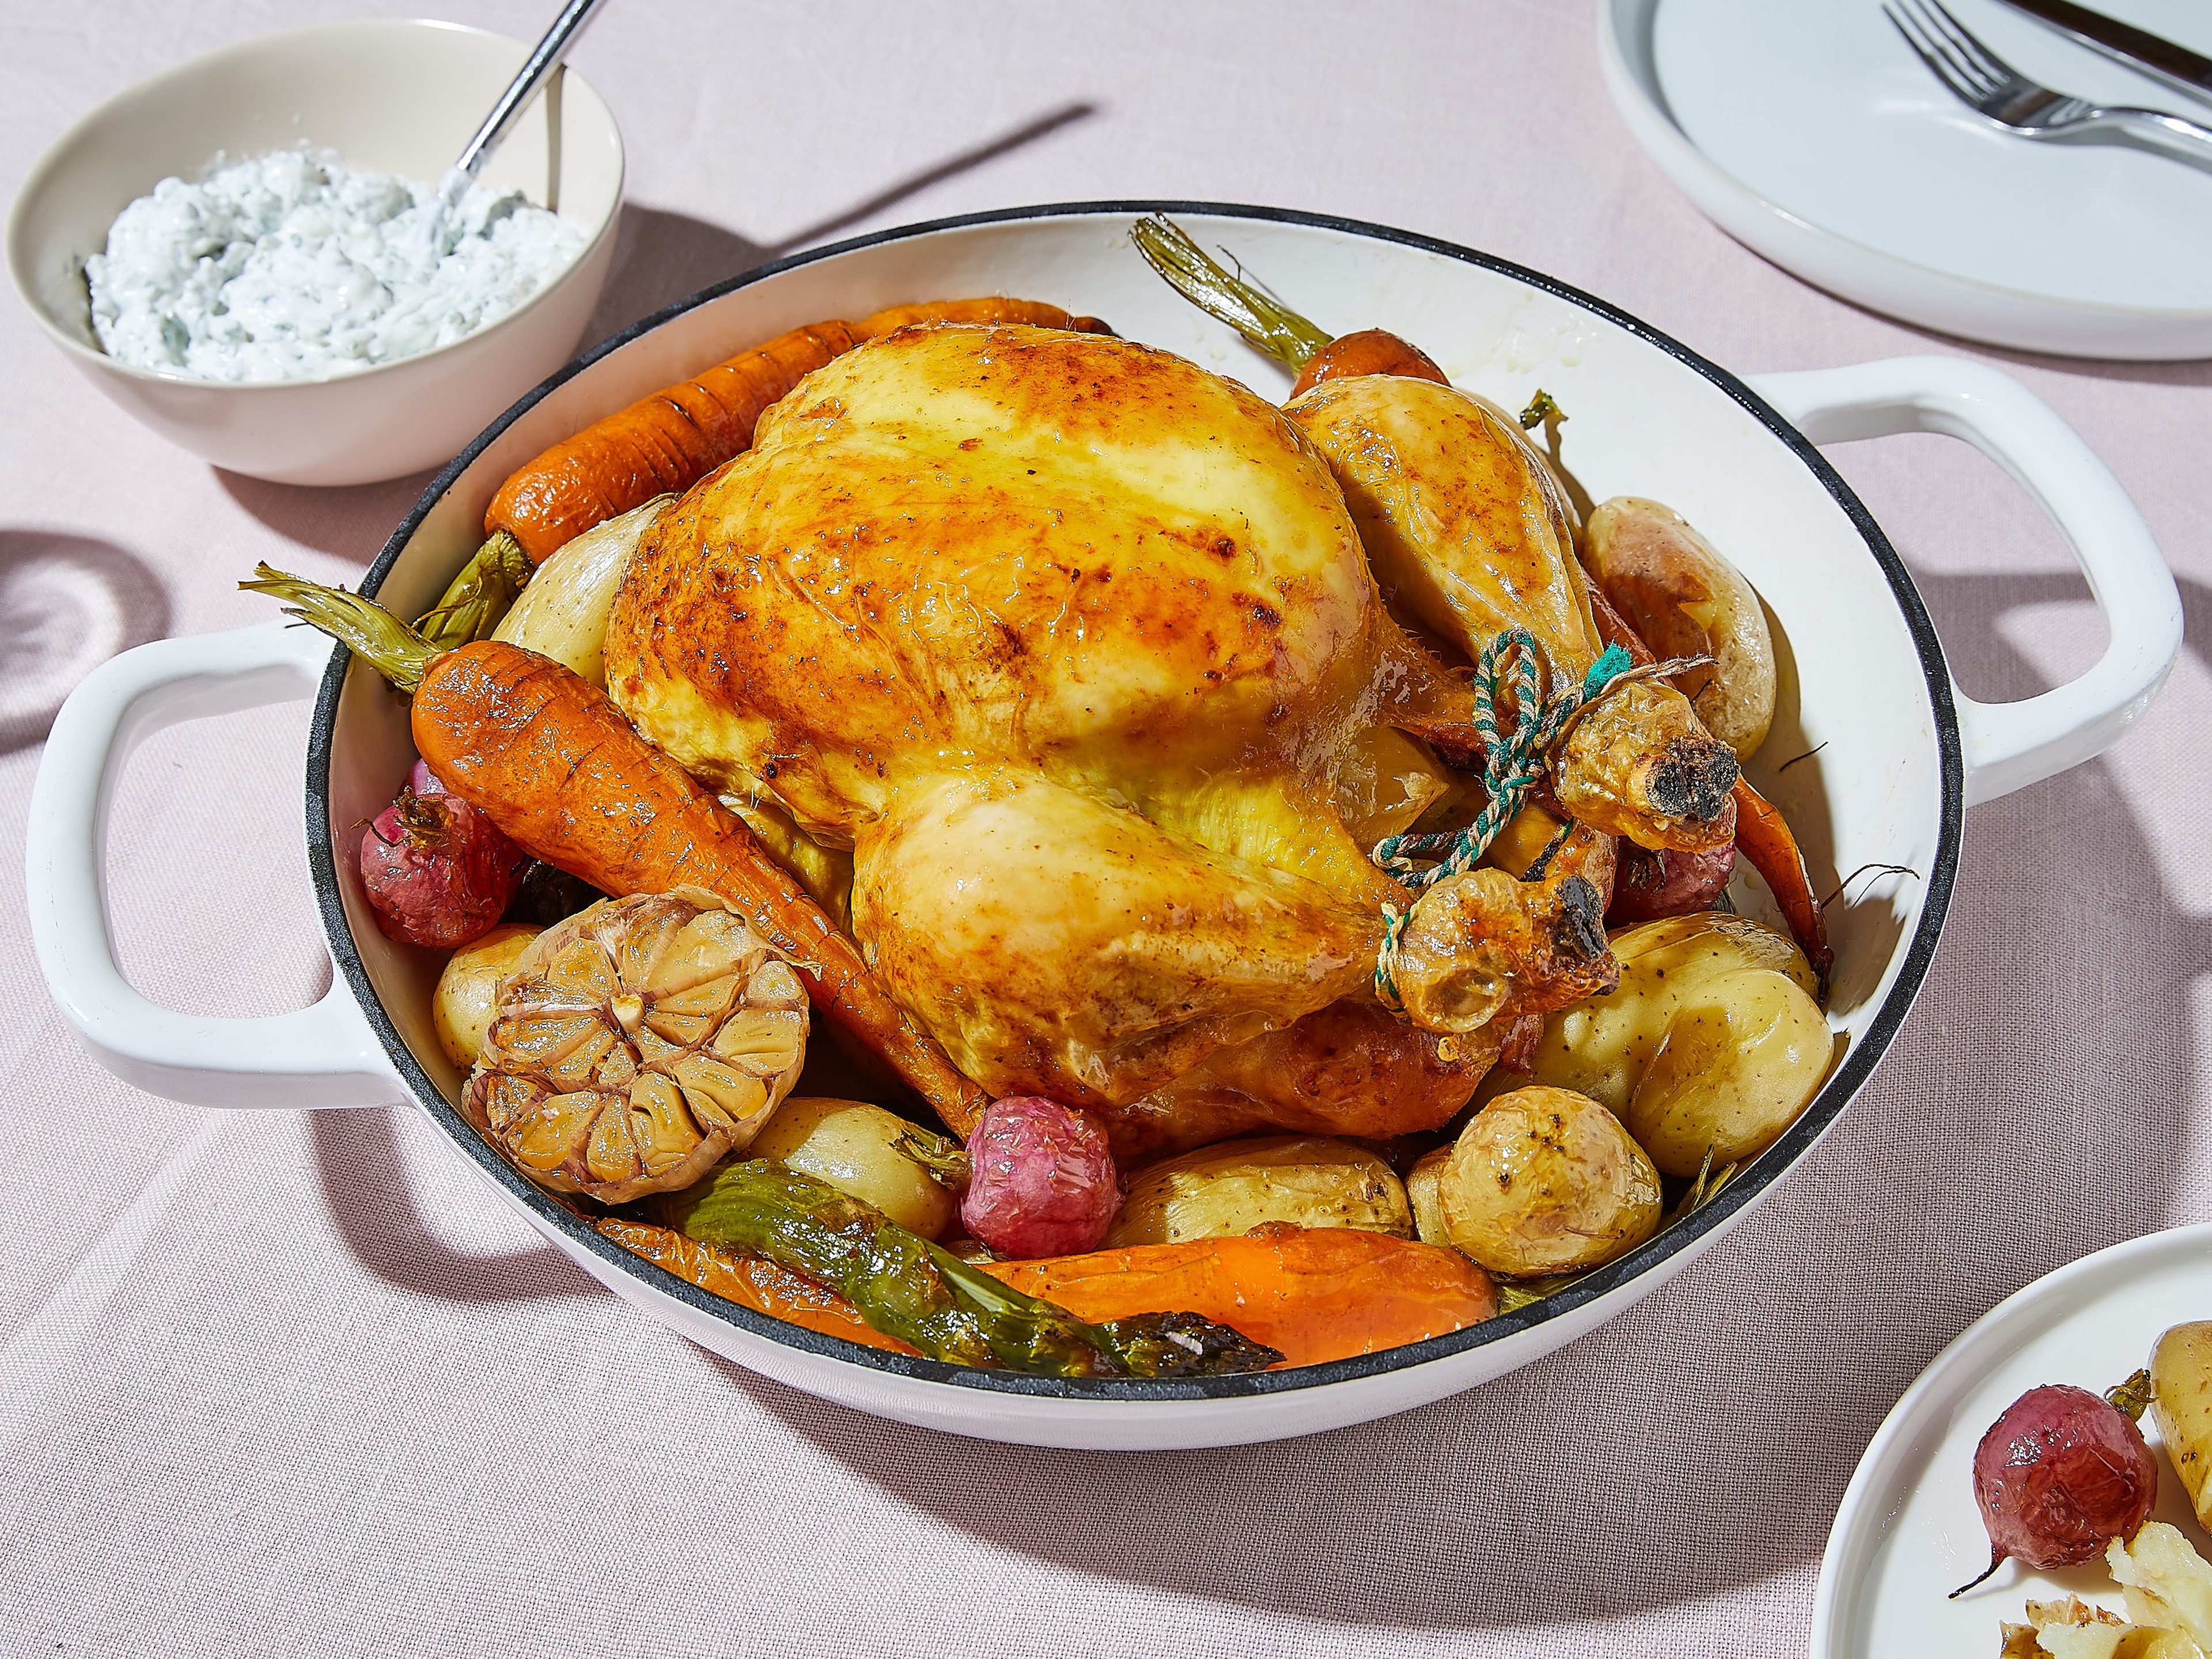 Simple lemon roasted chicken with spring vegetables